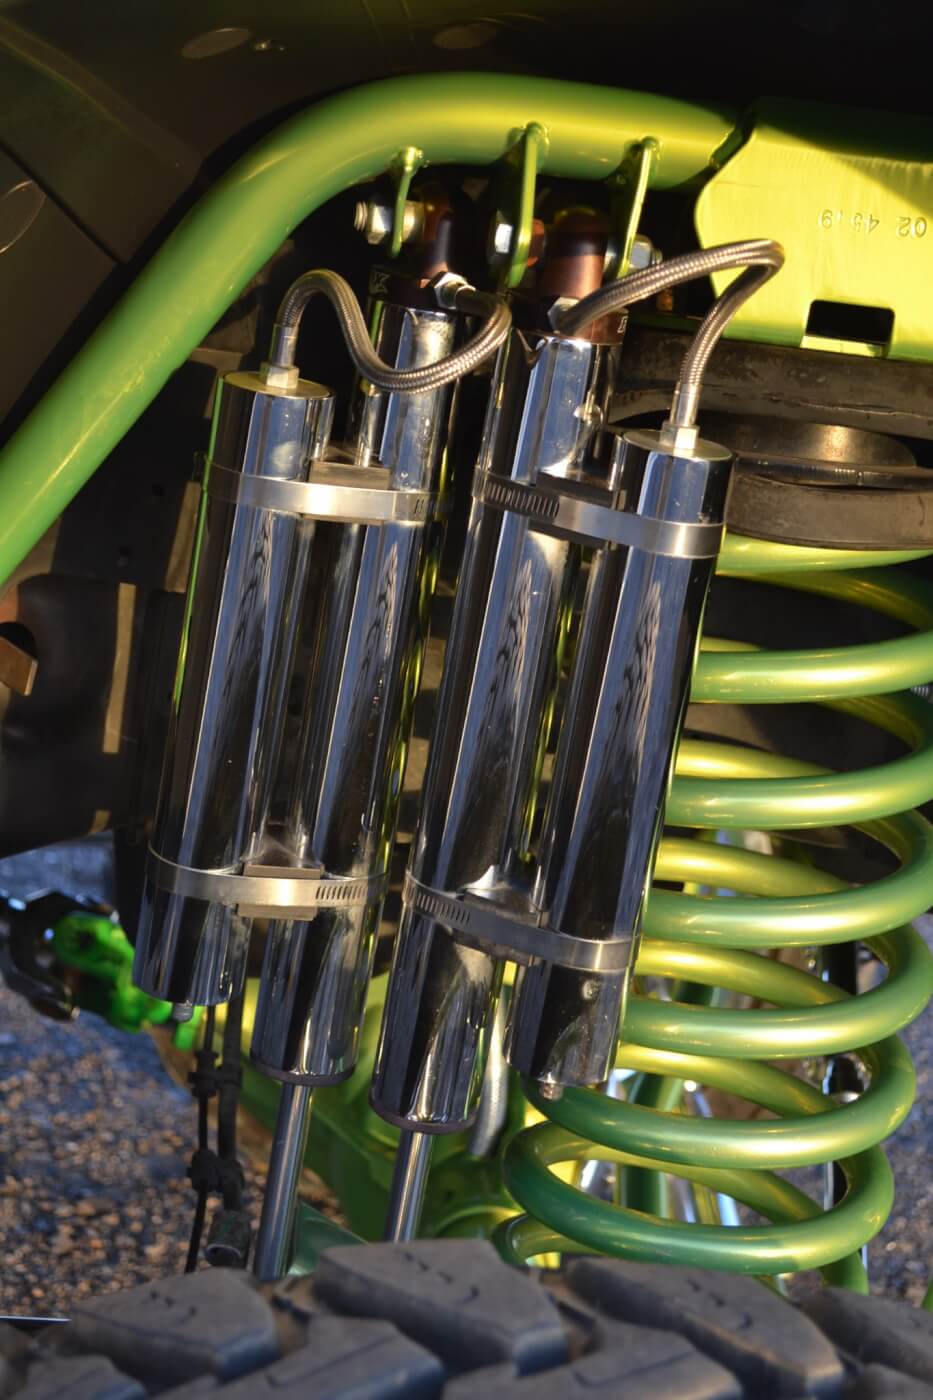 Big heavy wheels and tires require big dampening power, so part of the 10-inch lift was the installation of chrome King reservoir shocks. Two shocks per side get the job done and are hung from Shocker Yellow mounting brackets.